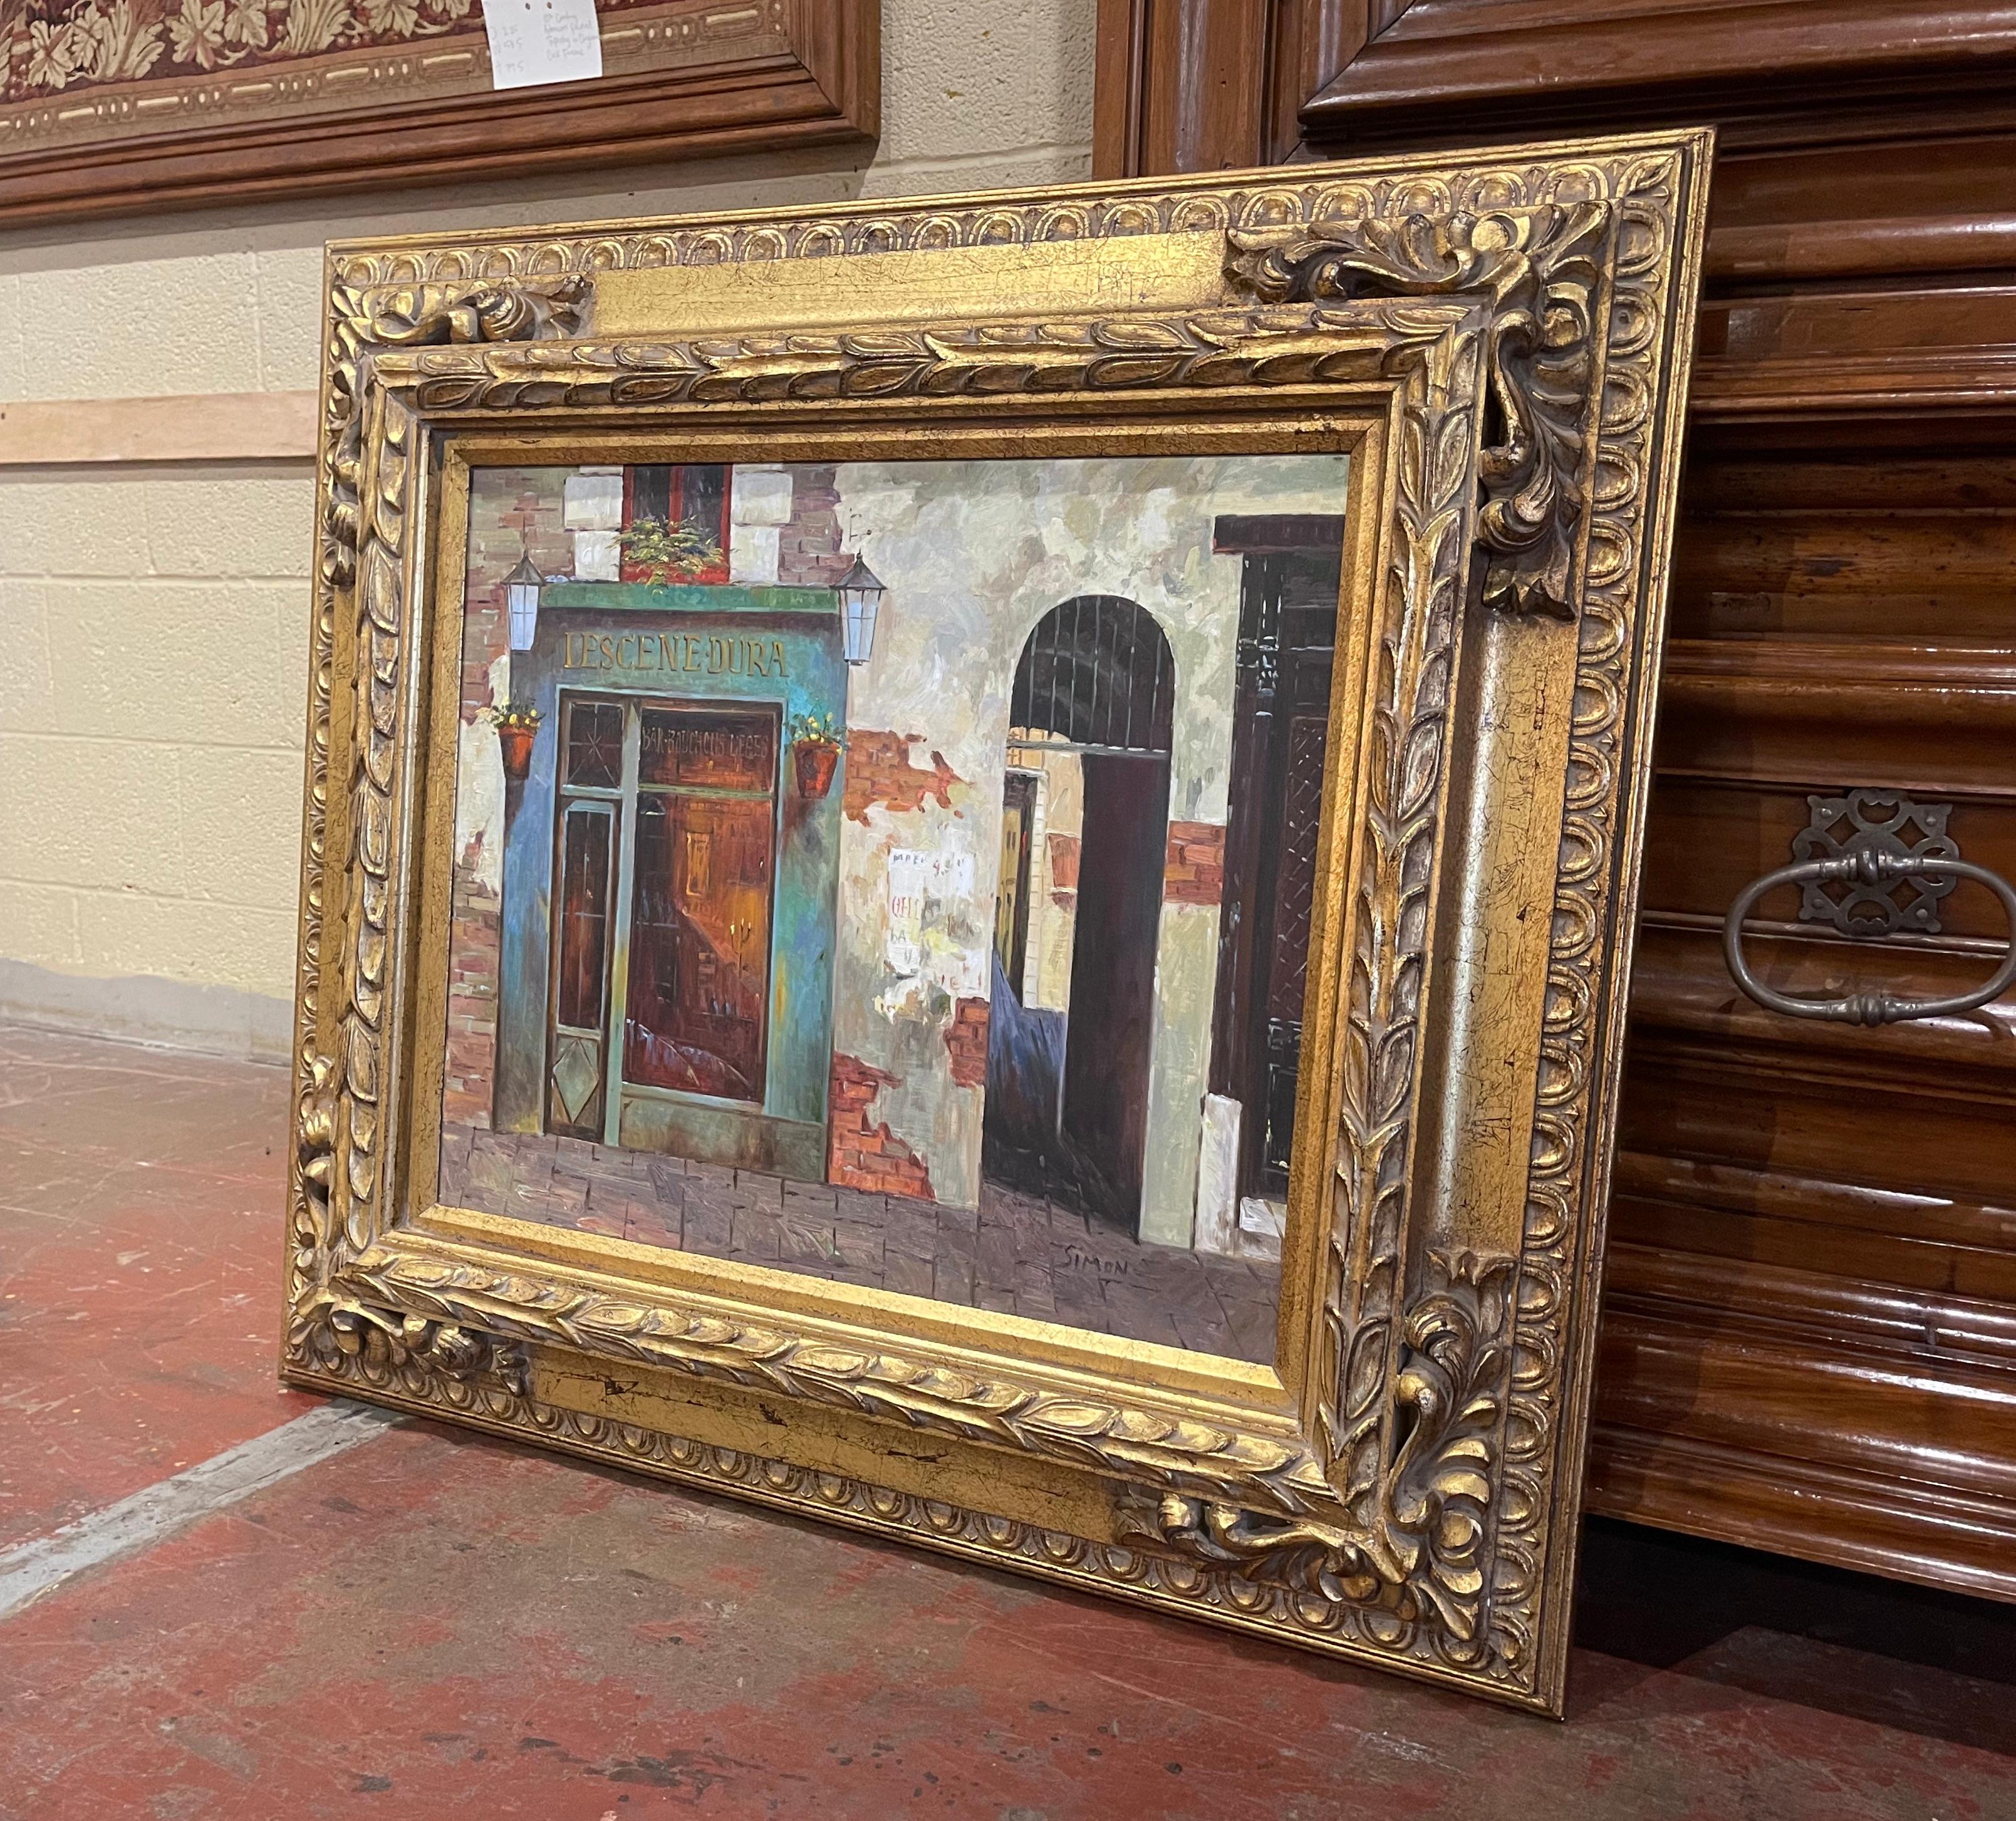 Decorate a living room or bedroom with this elegant street scene painting. Crafted in France circa 1990, this captivating work of art transports you to the romantic streets of Paris, featuring a delightful small shop set against an intricate